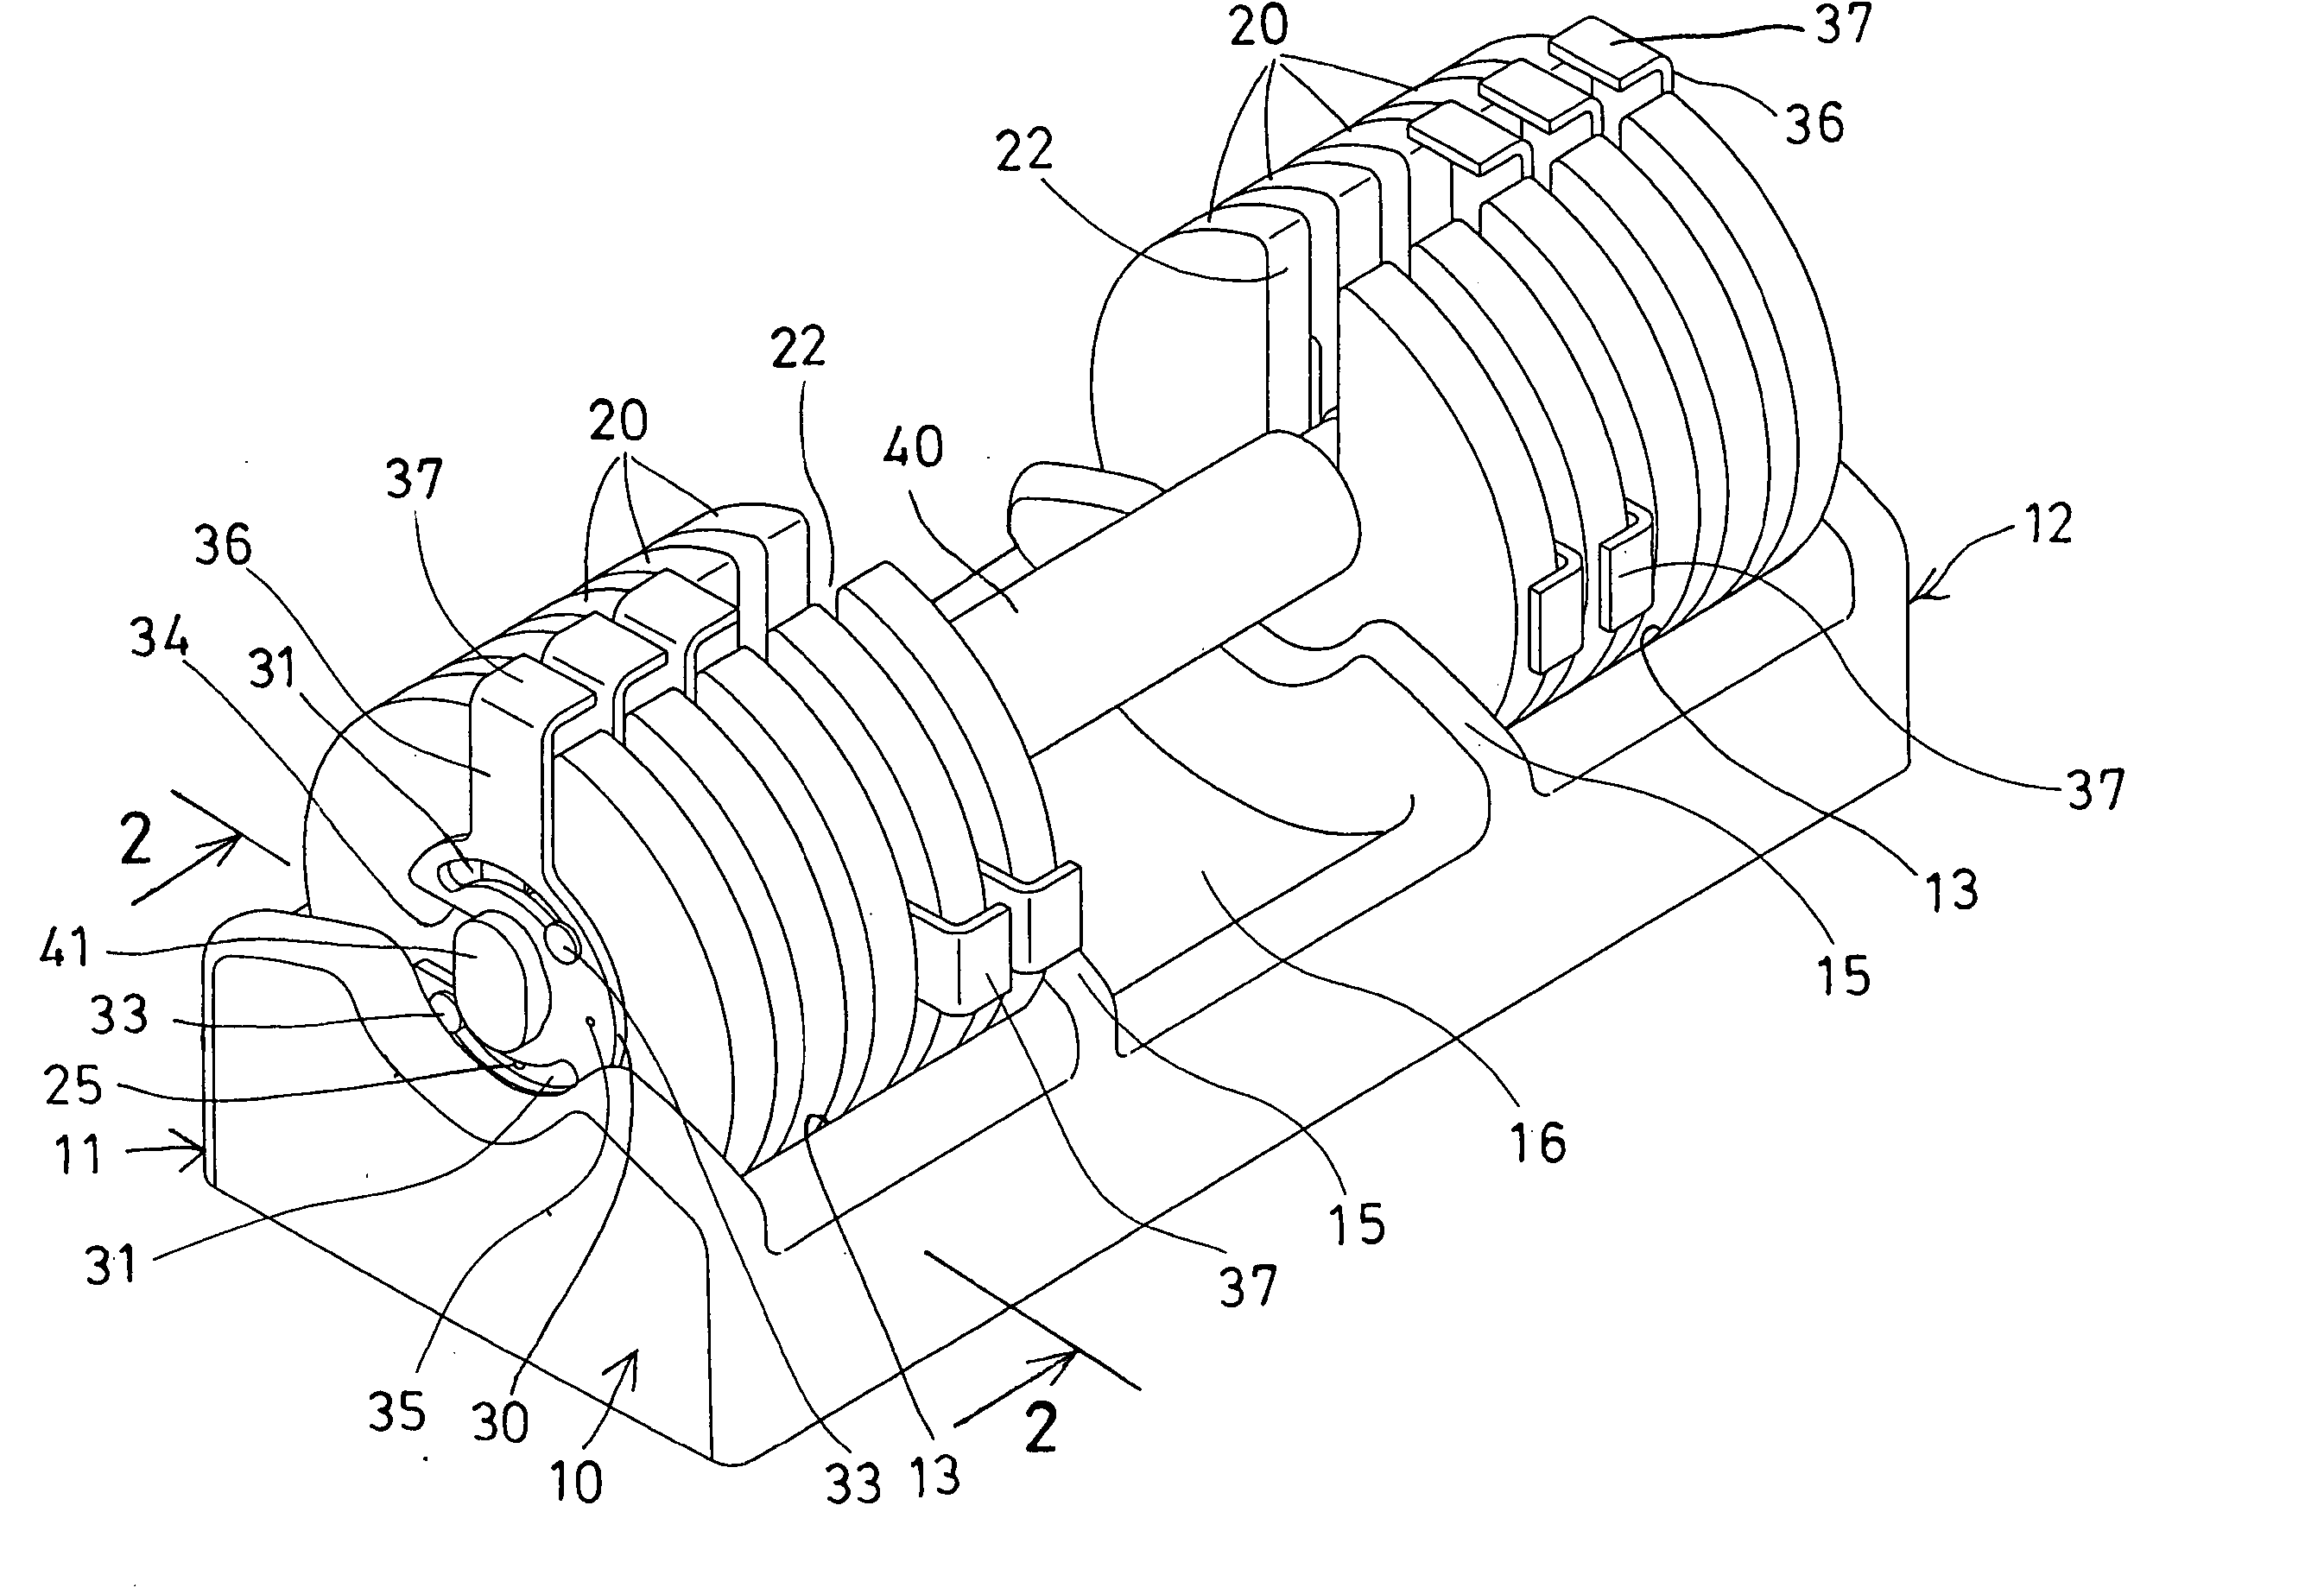 Weight lifting device having selector device